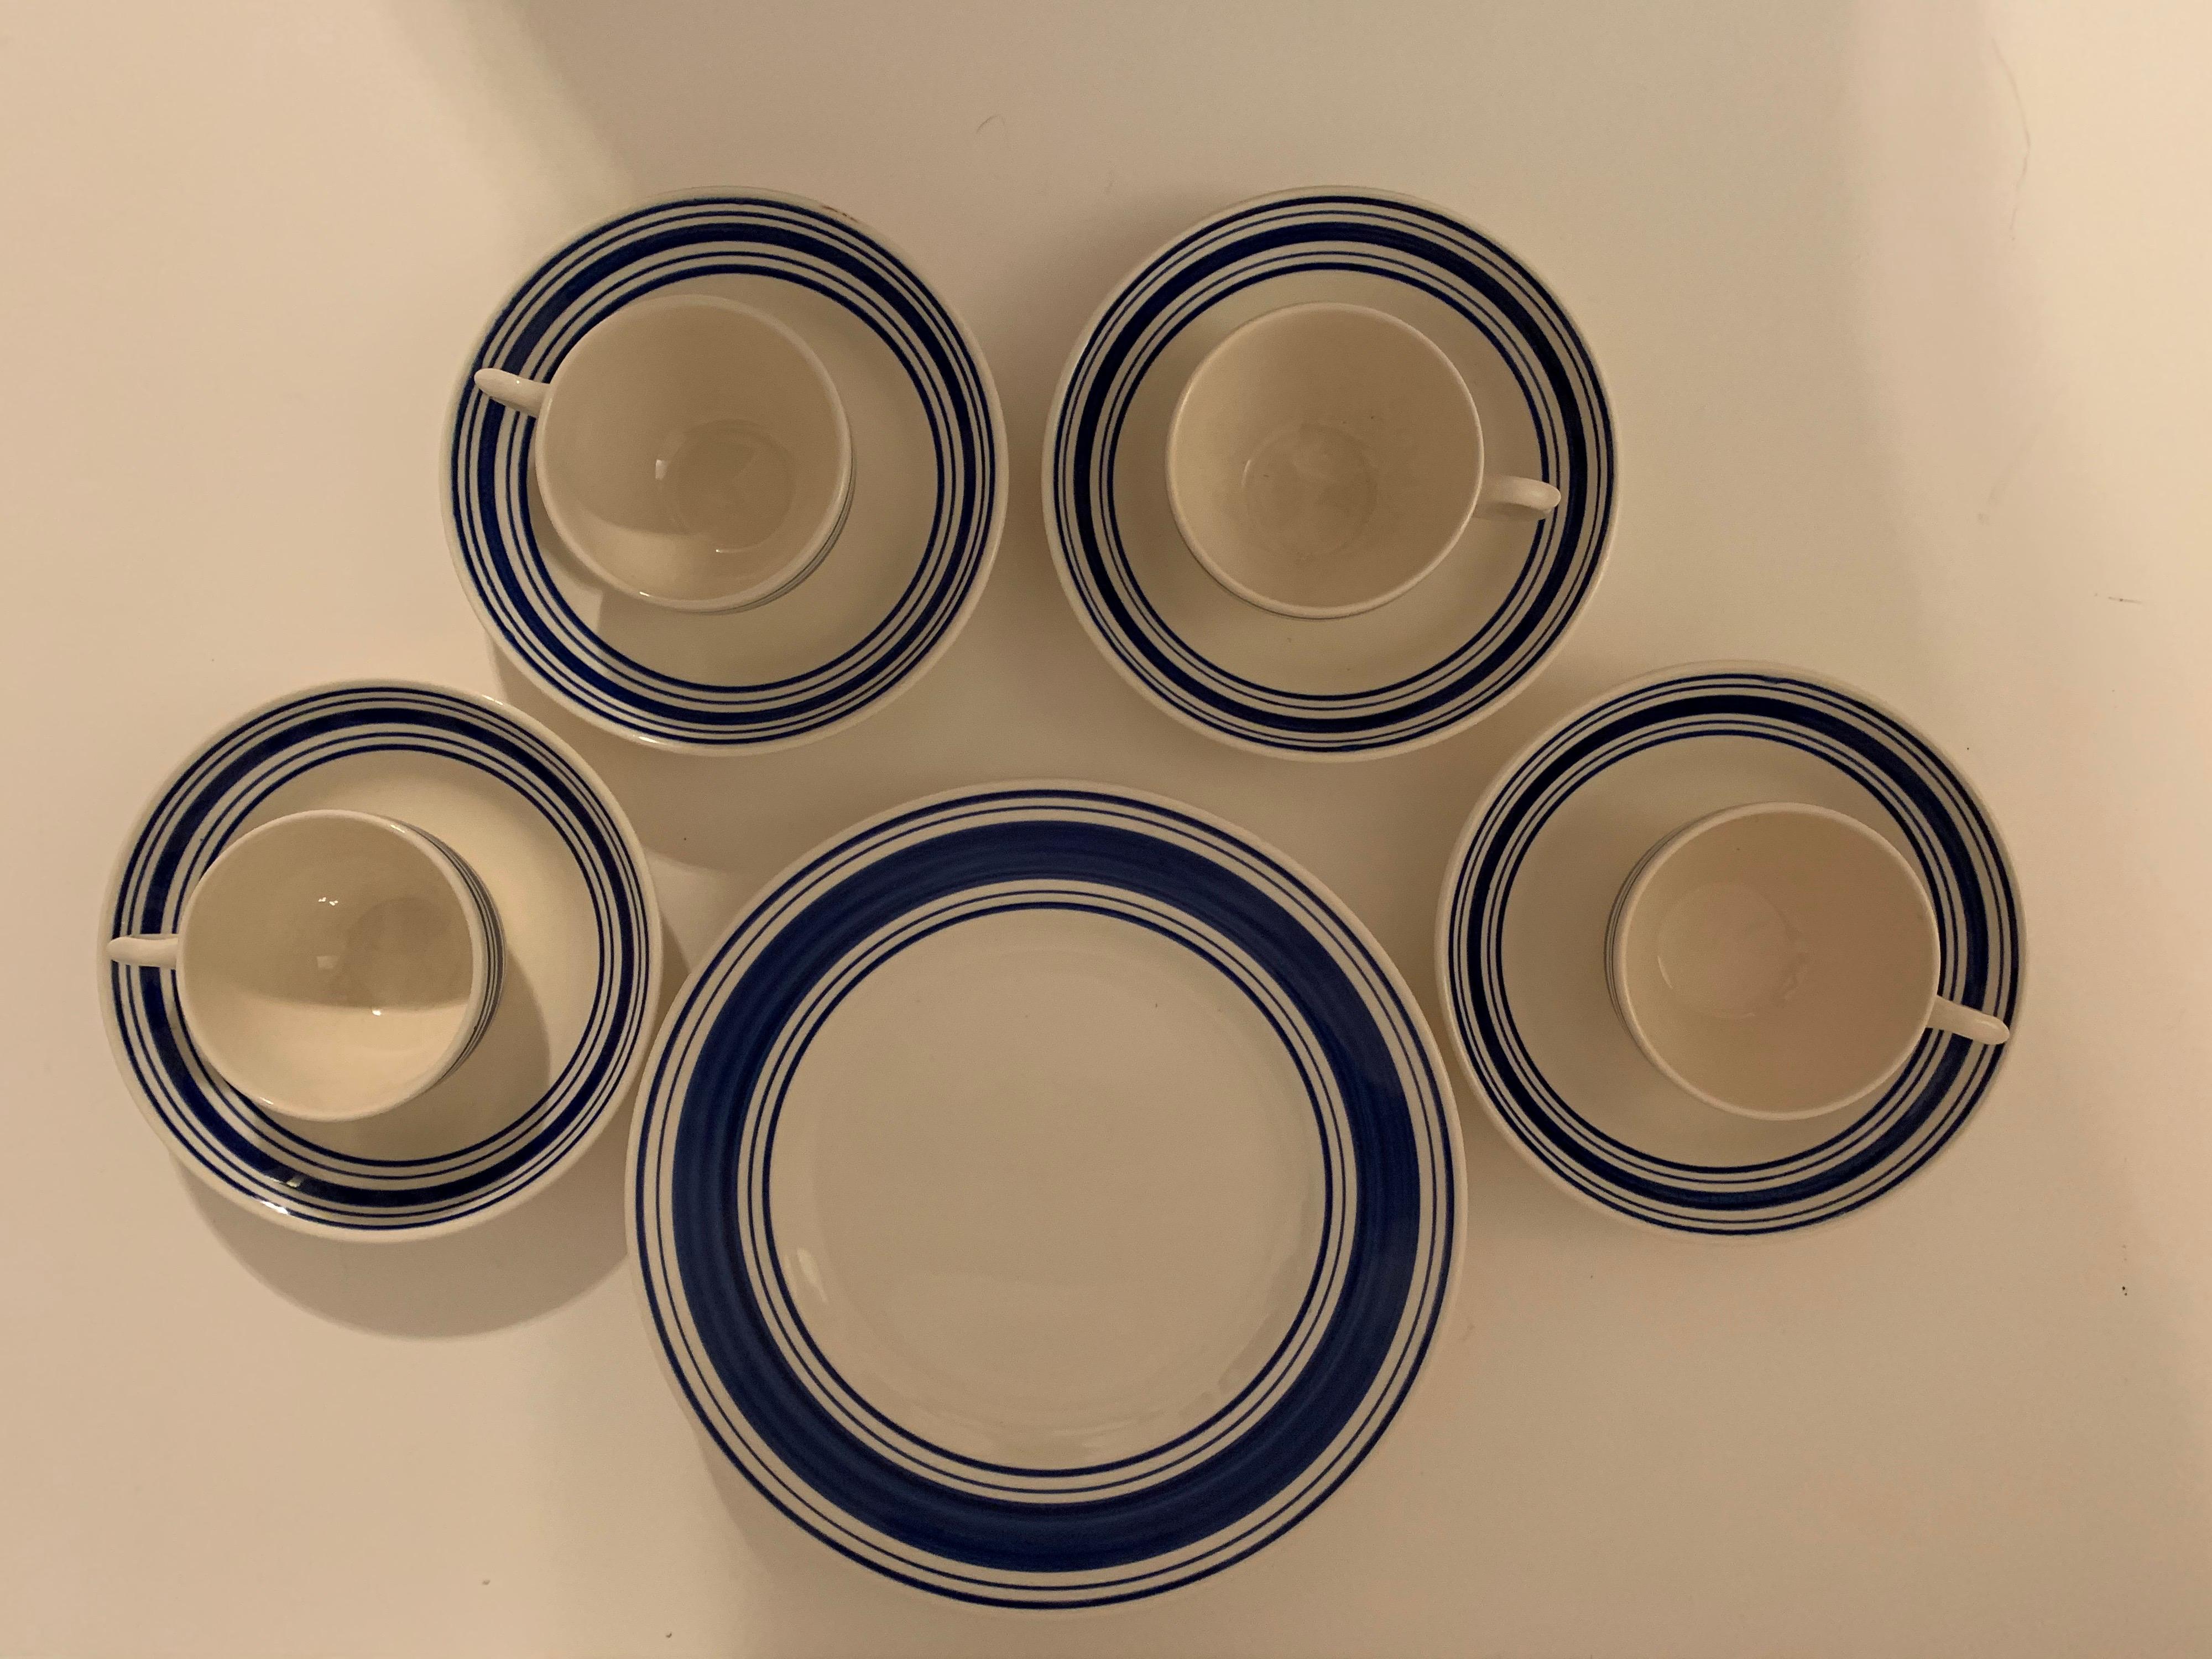 A 12 piece dinnerware set in the Farmstead blue and white pattern by Ralph Lauren Home collection. Signed. Ironstone. Made in England; circa 1990.

Features a blue and white ticking-inspired striped border on white.

Includes the follow 12 pieces:
4